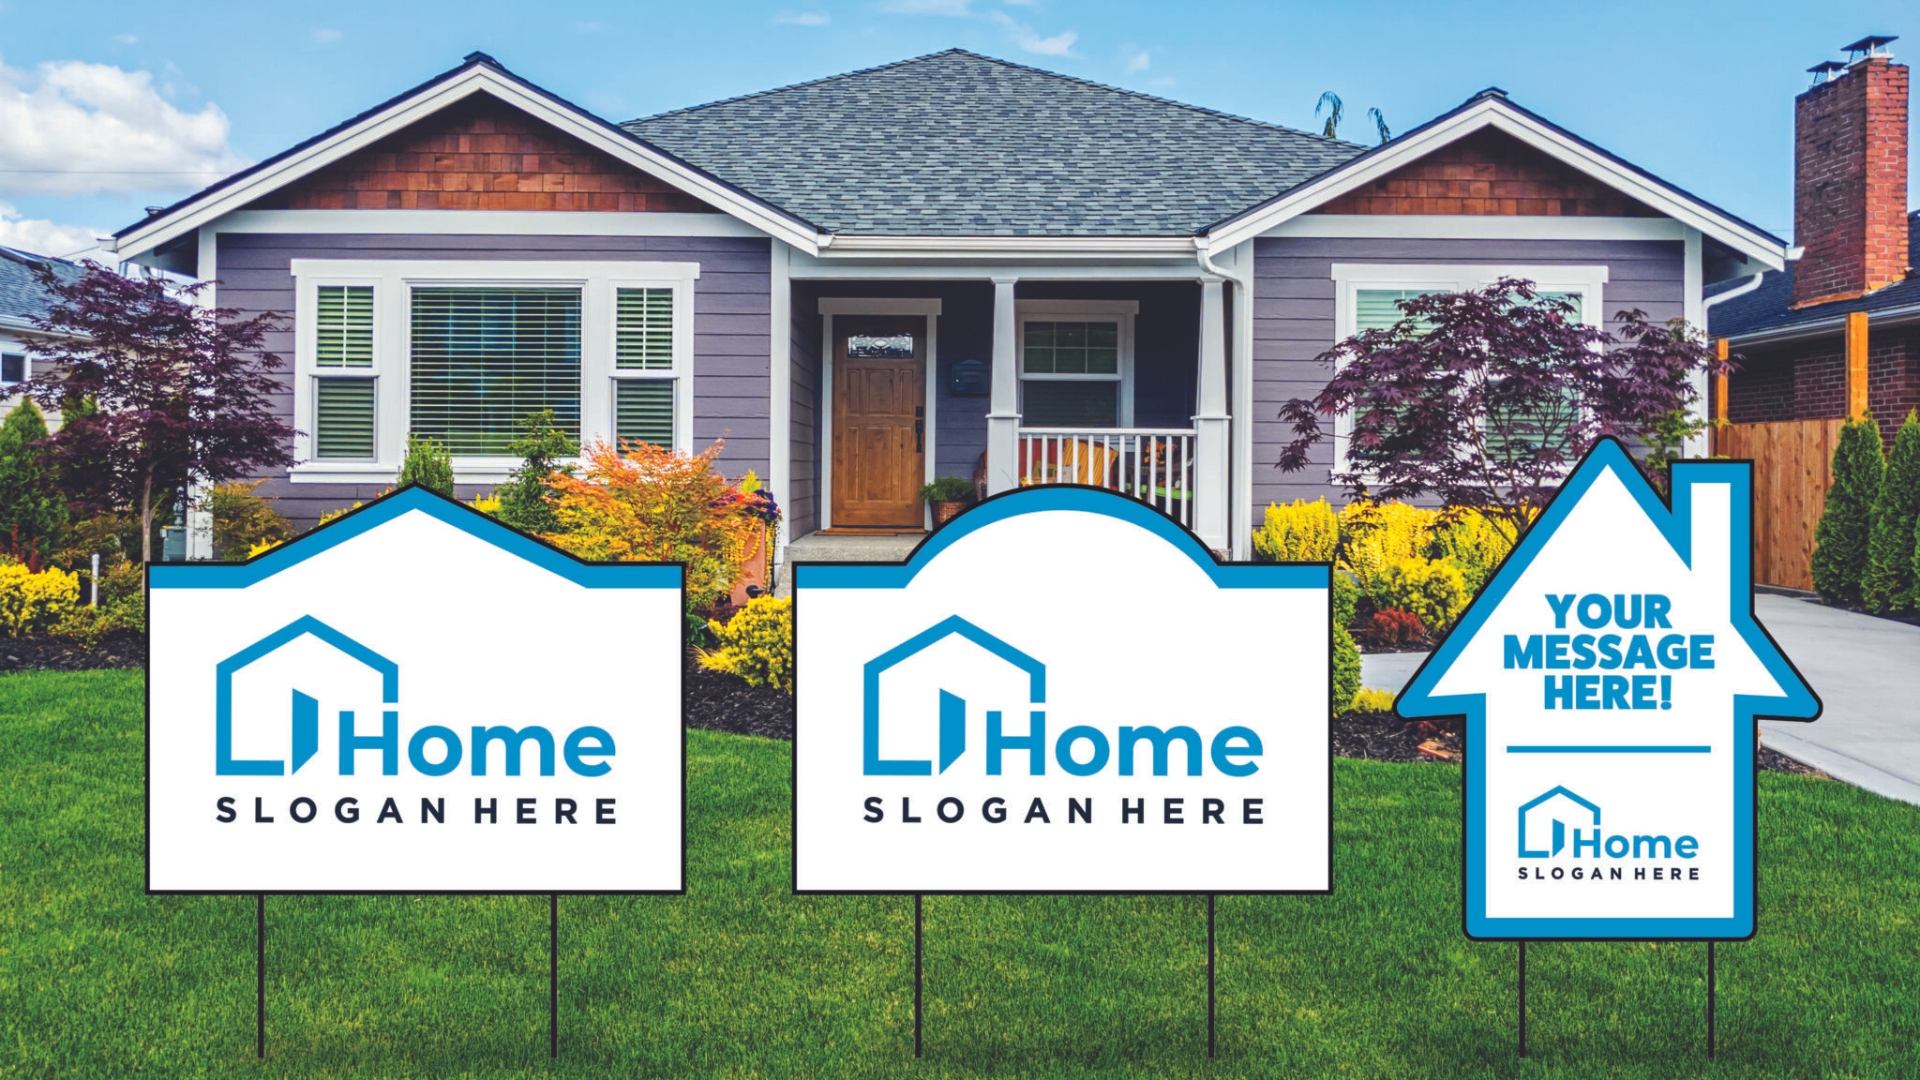 Marketing with Yard Signs: Small Investment, Big Results